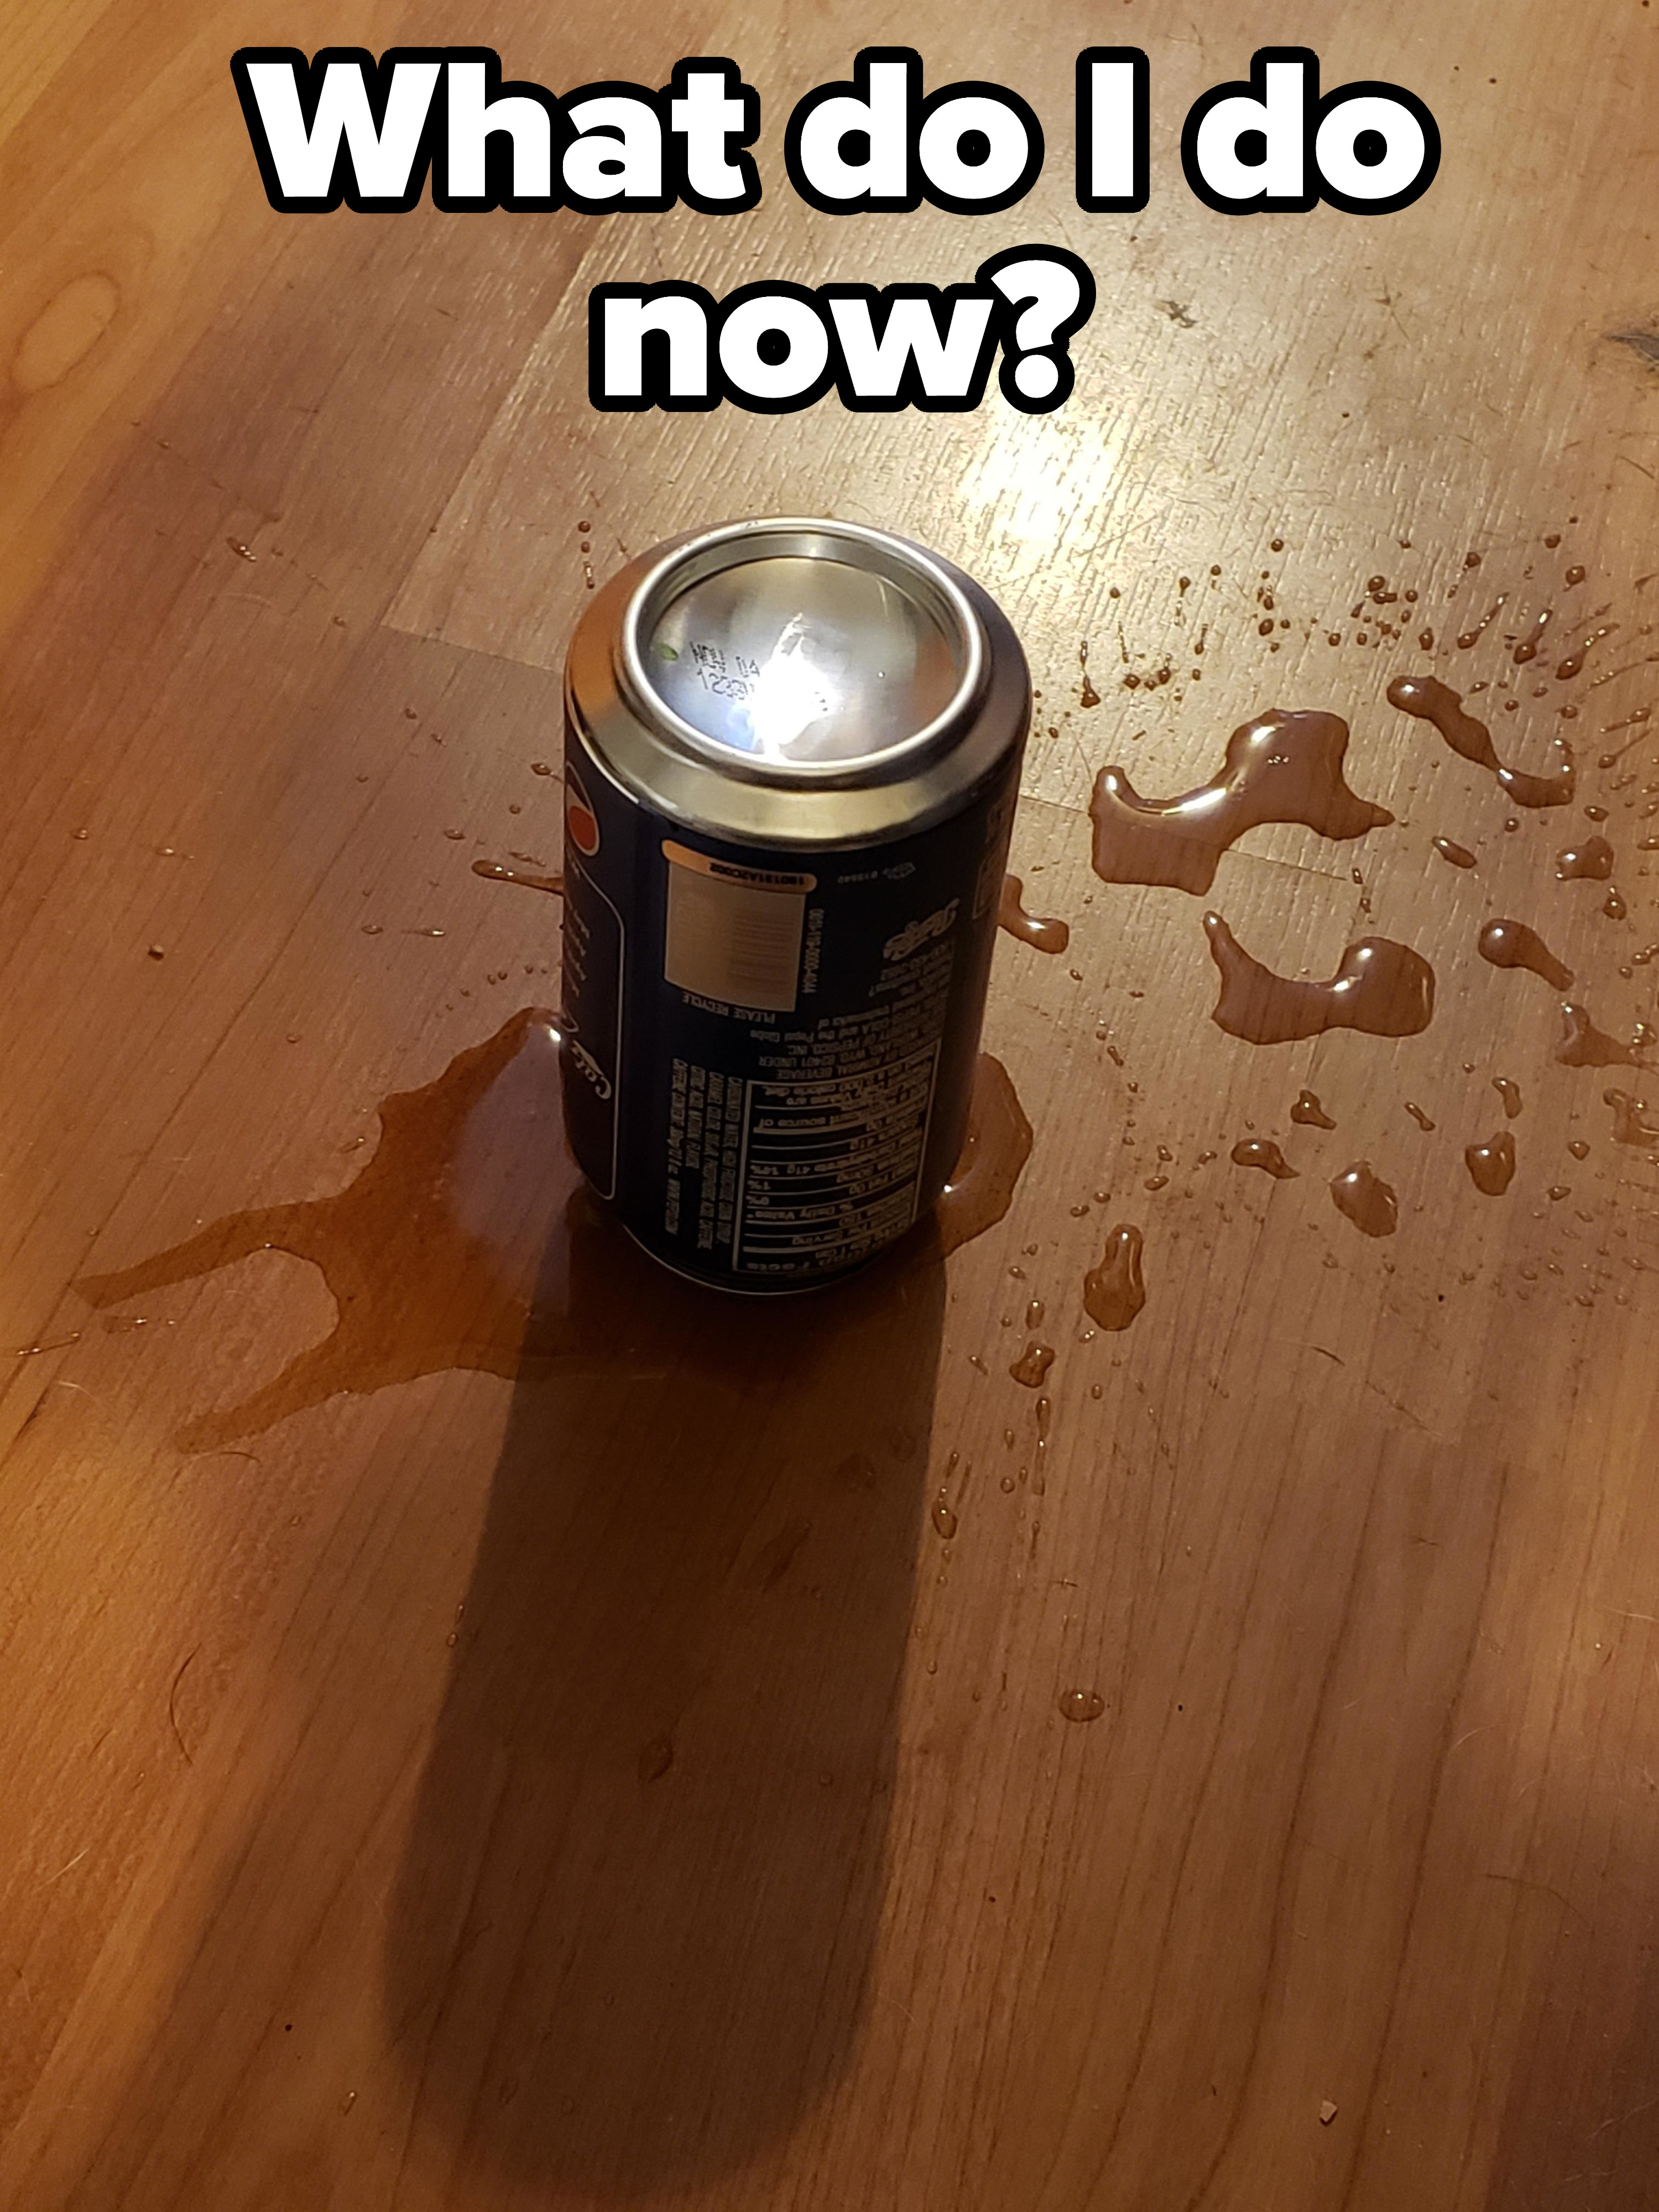 Upside-down Pepsi can that fell on the floor, with only some of it on the floor